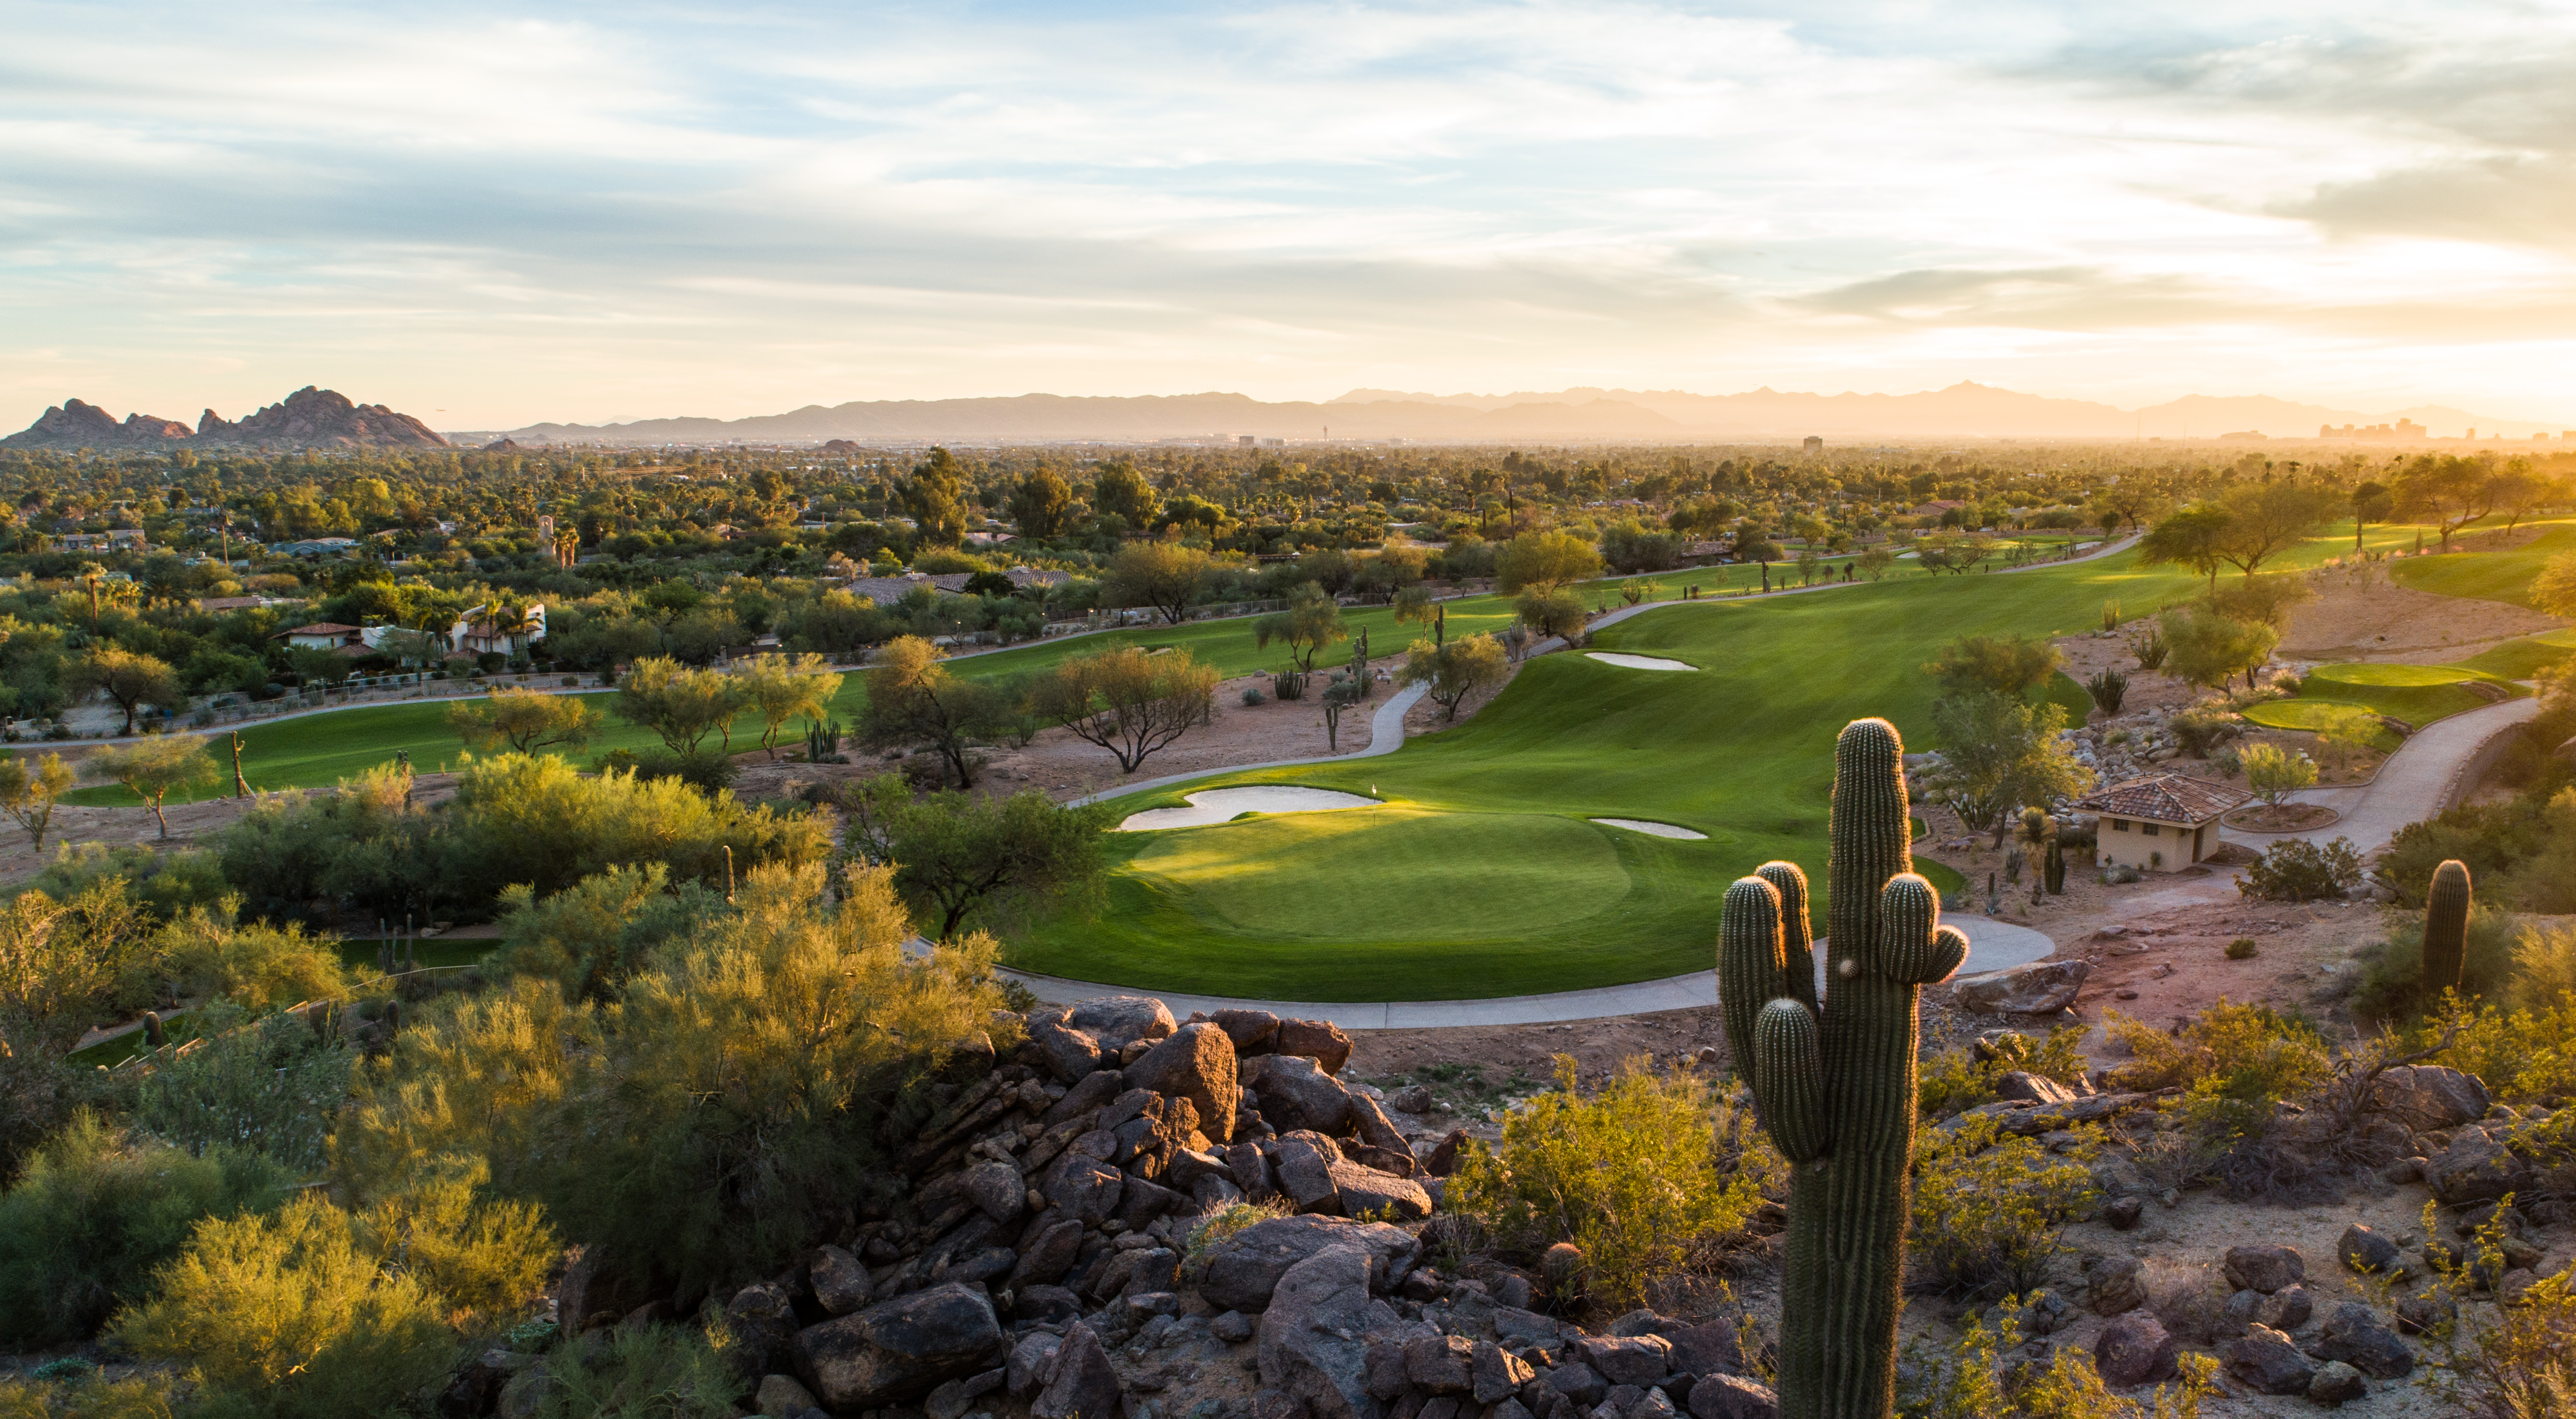 The 10 best Christmas gifts for golfers at Scottsdale Golf